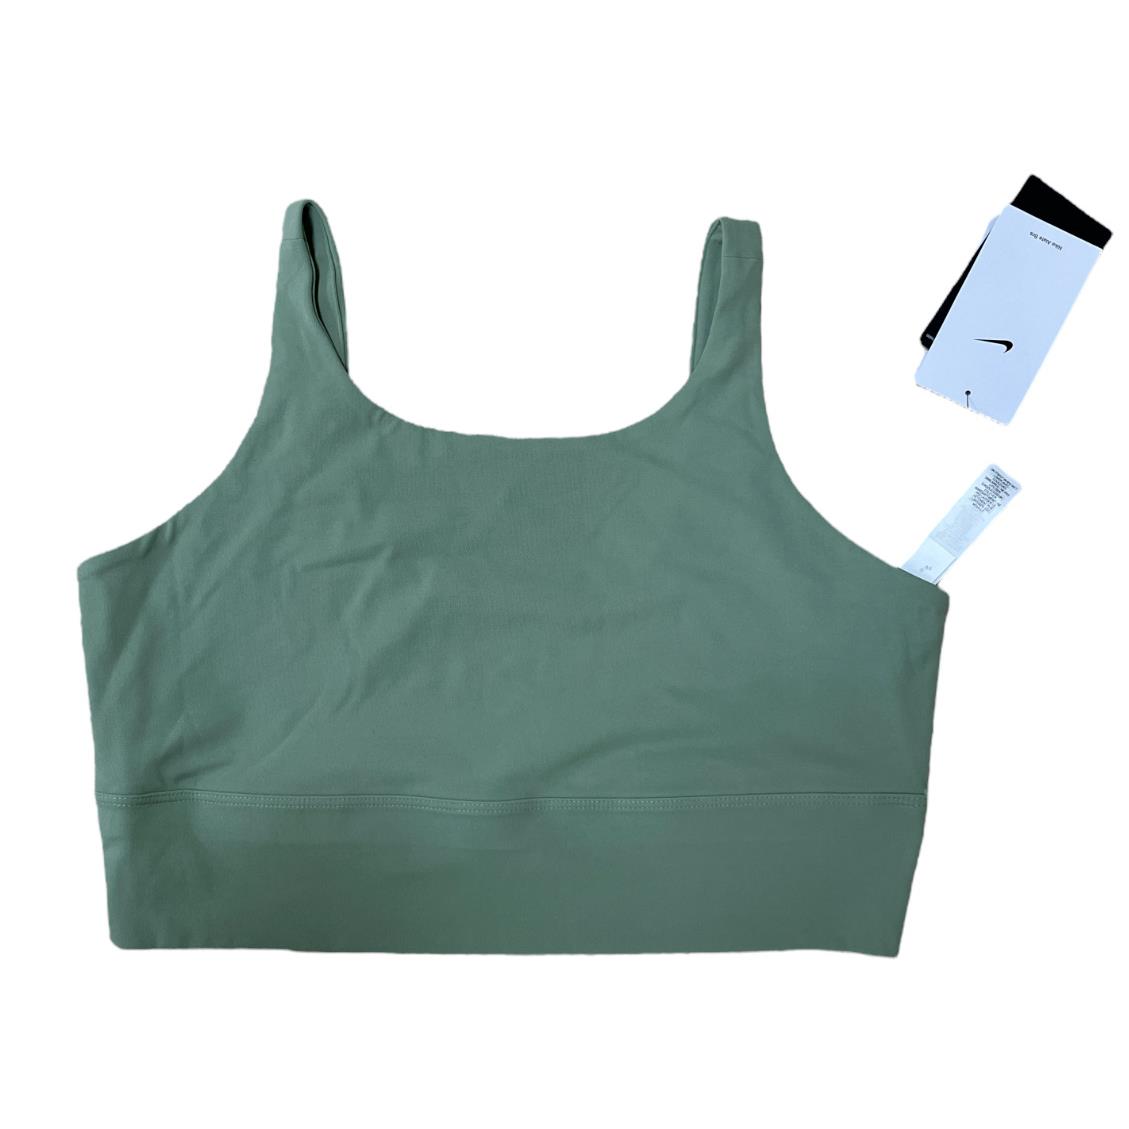 Nike Sport Bra Trainning Top For Women Gray Green You As See Pics Size L